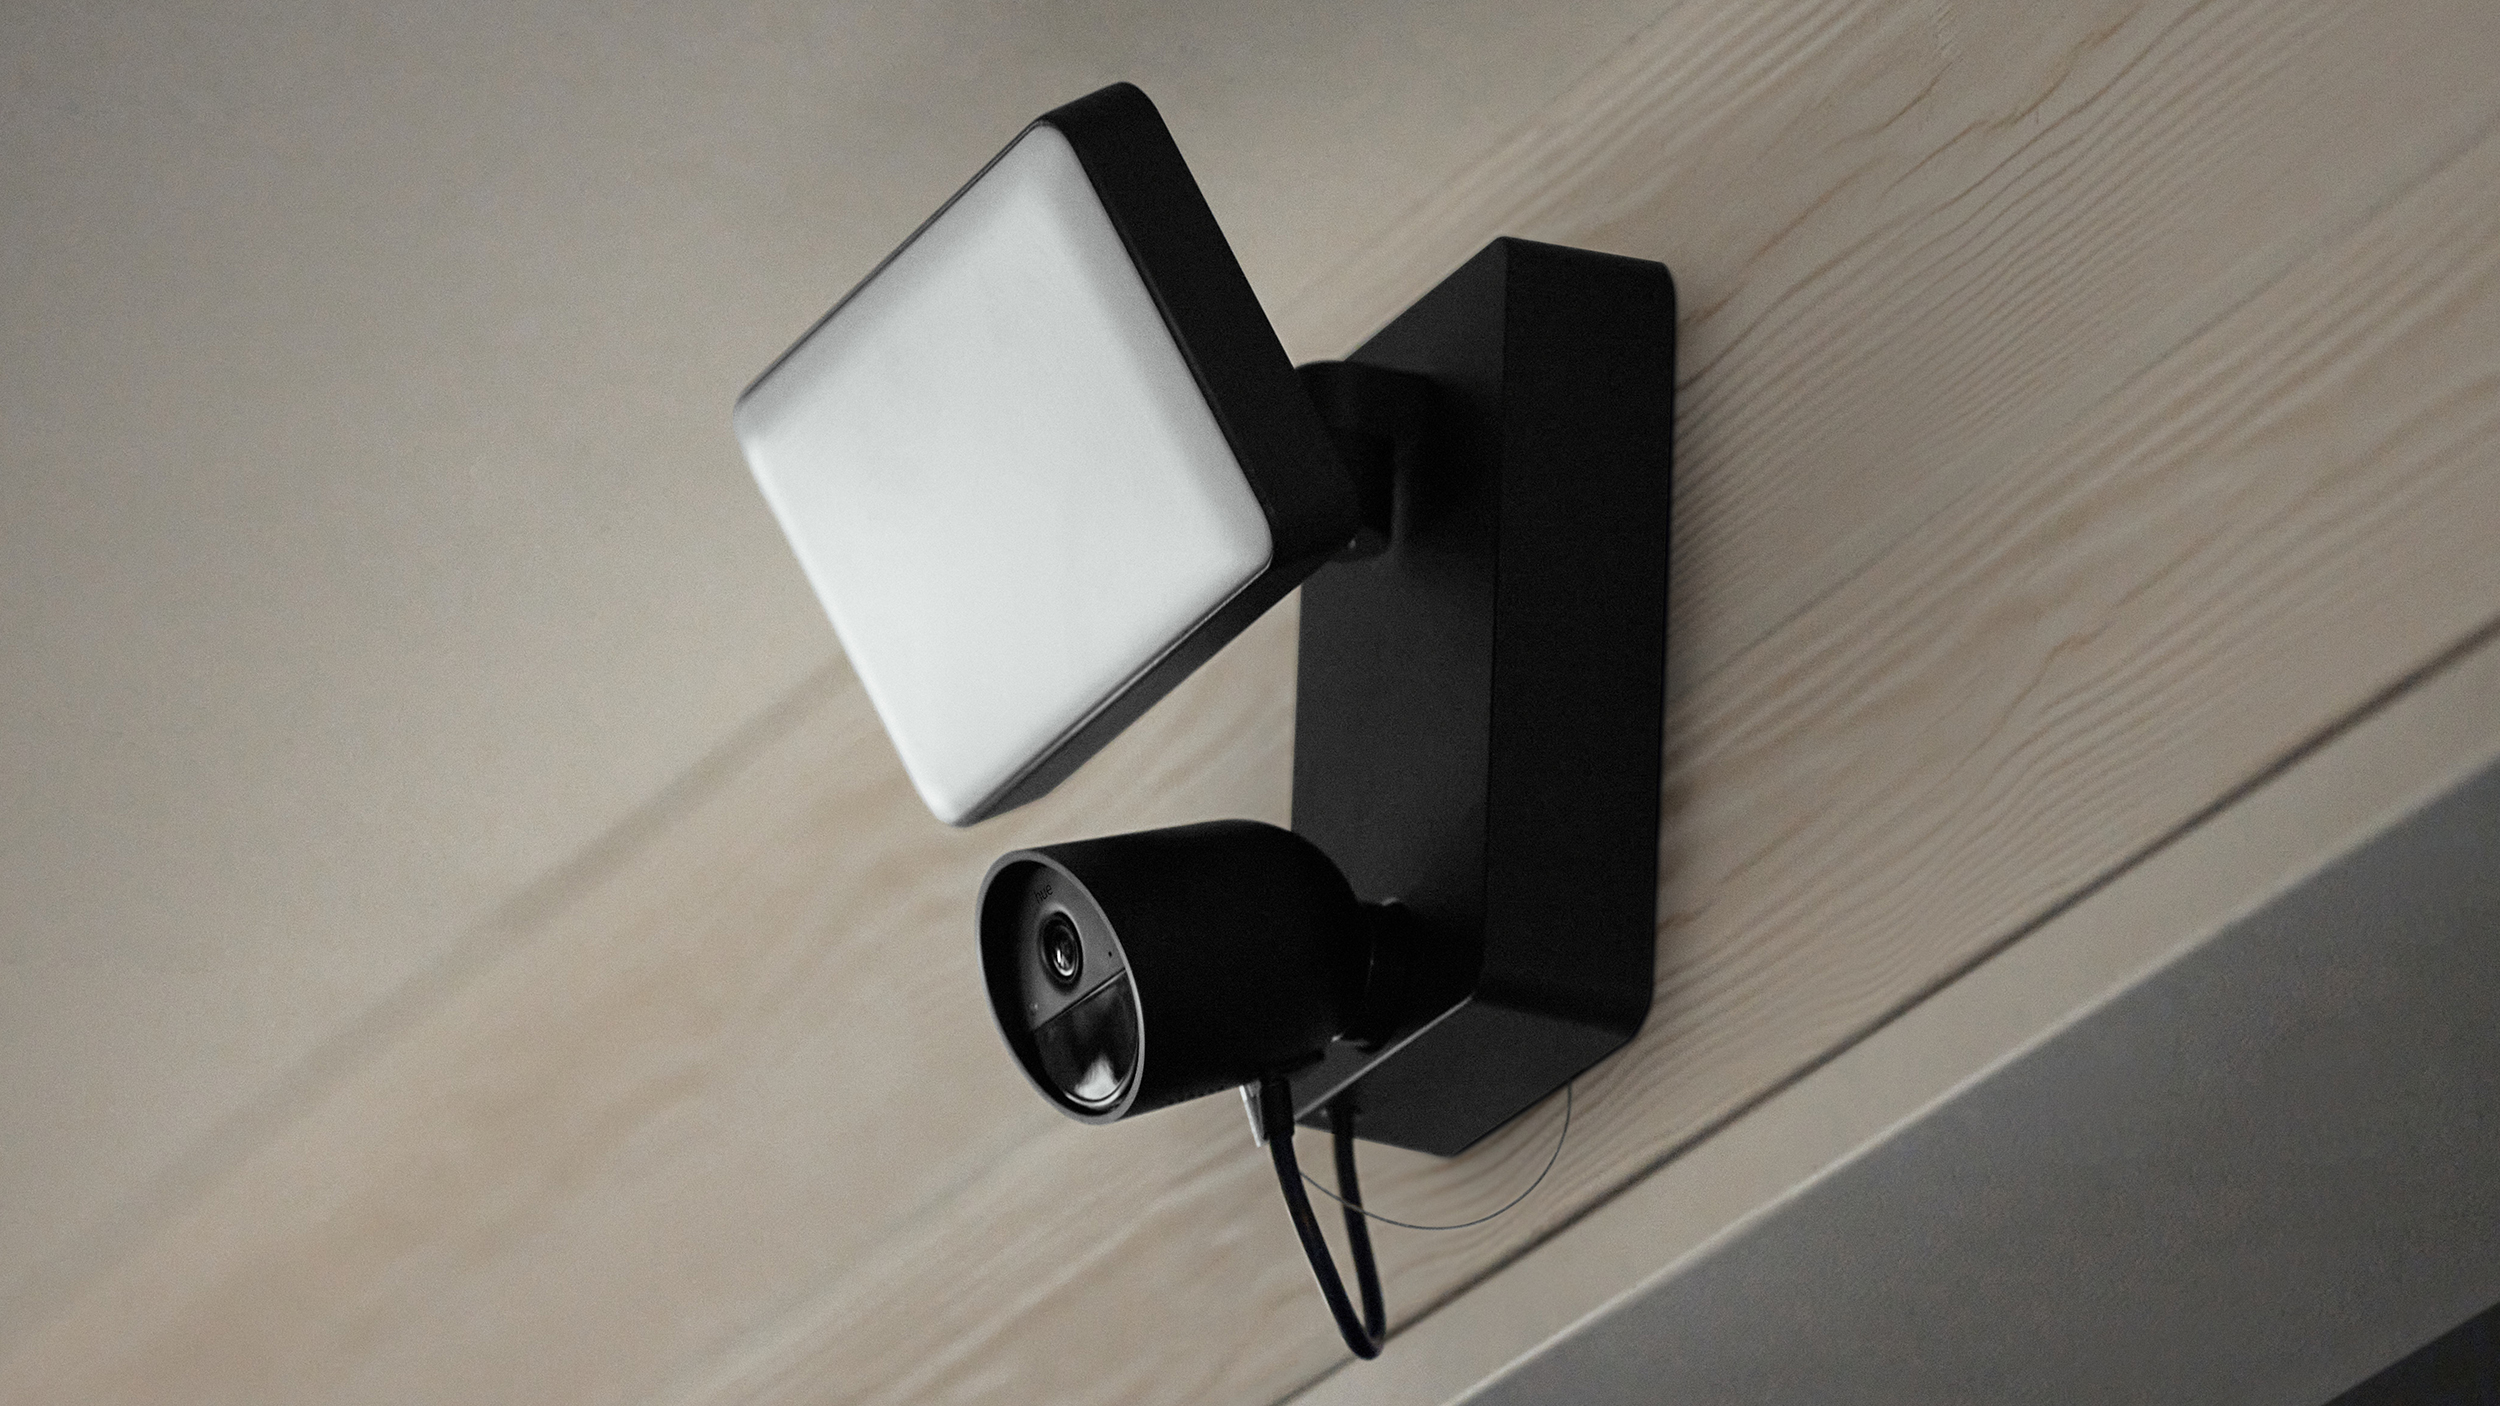 The Philips Hue Secure Floodlight camera on a wall